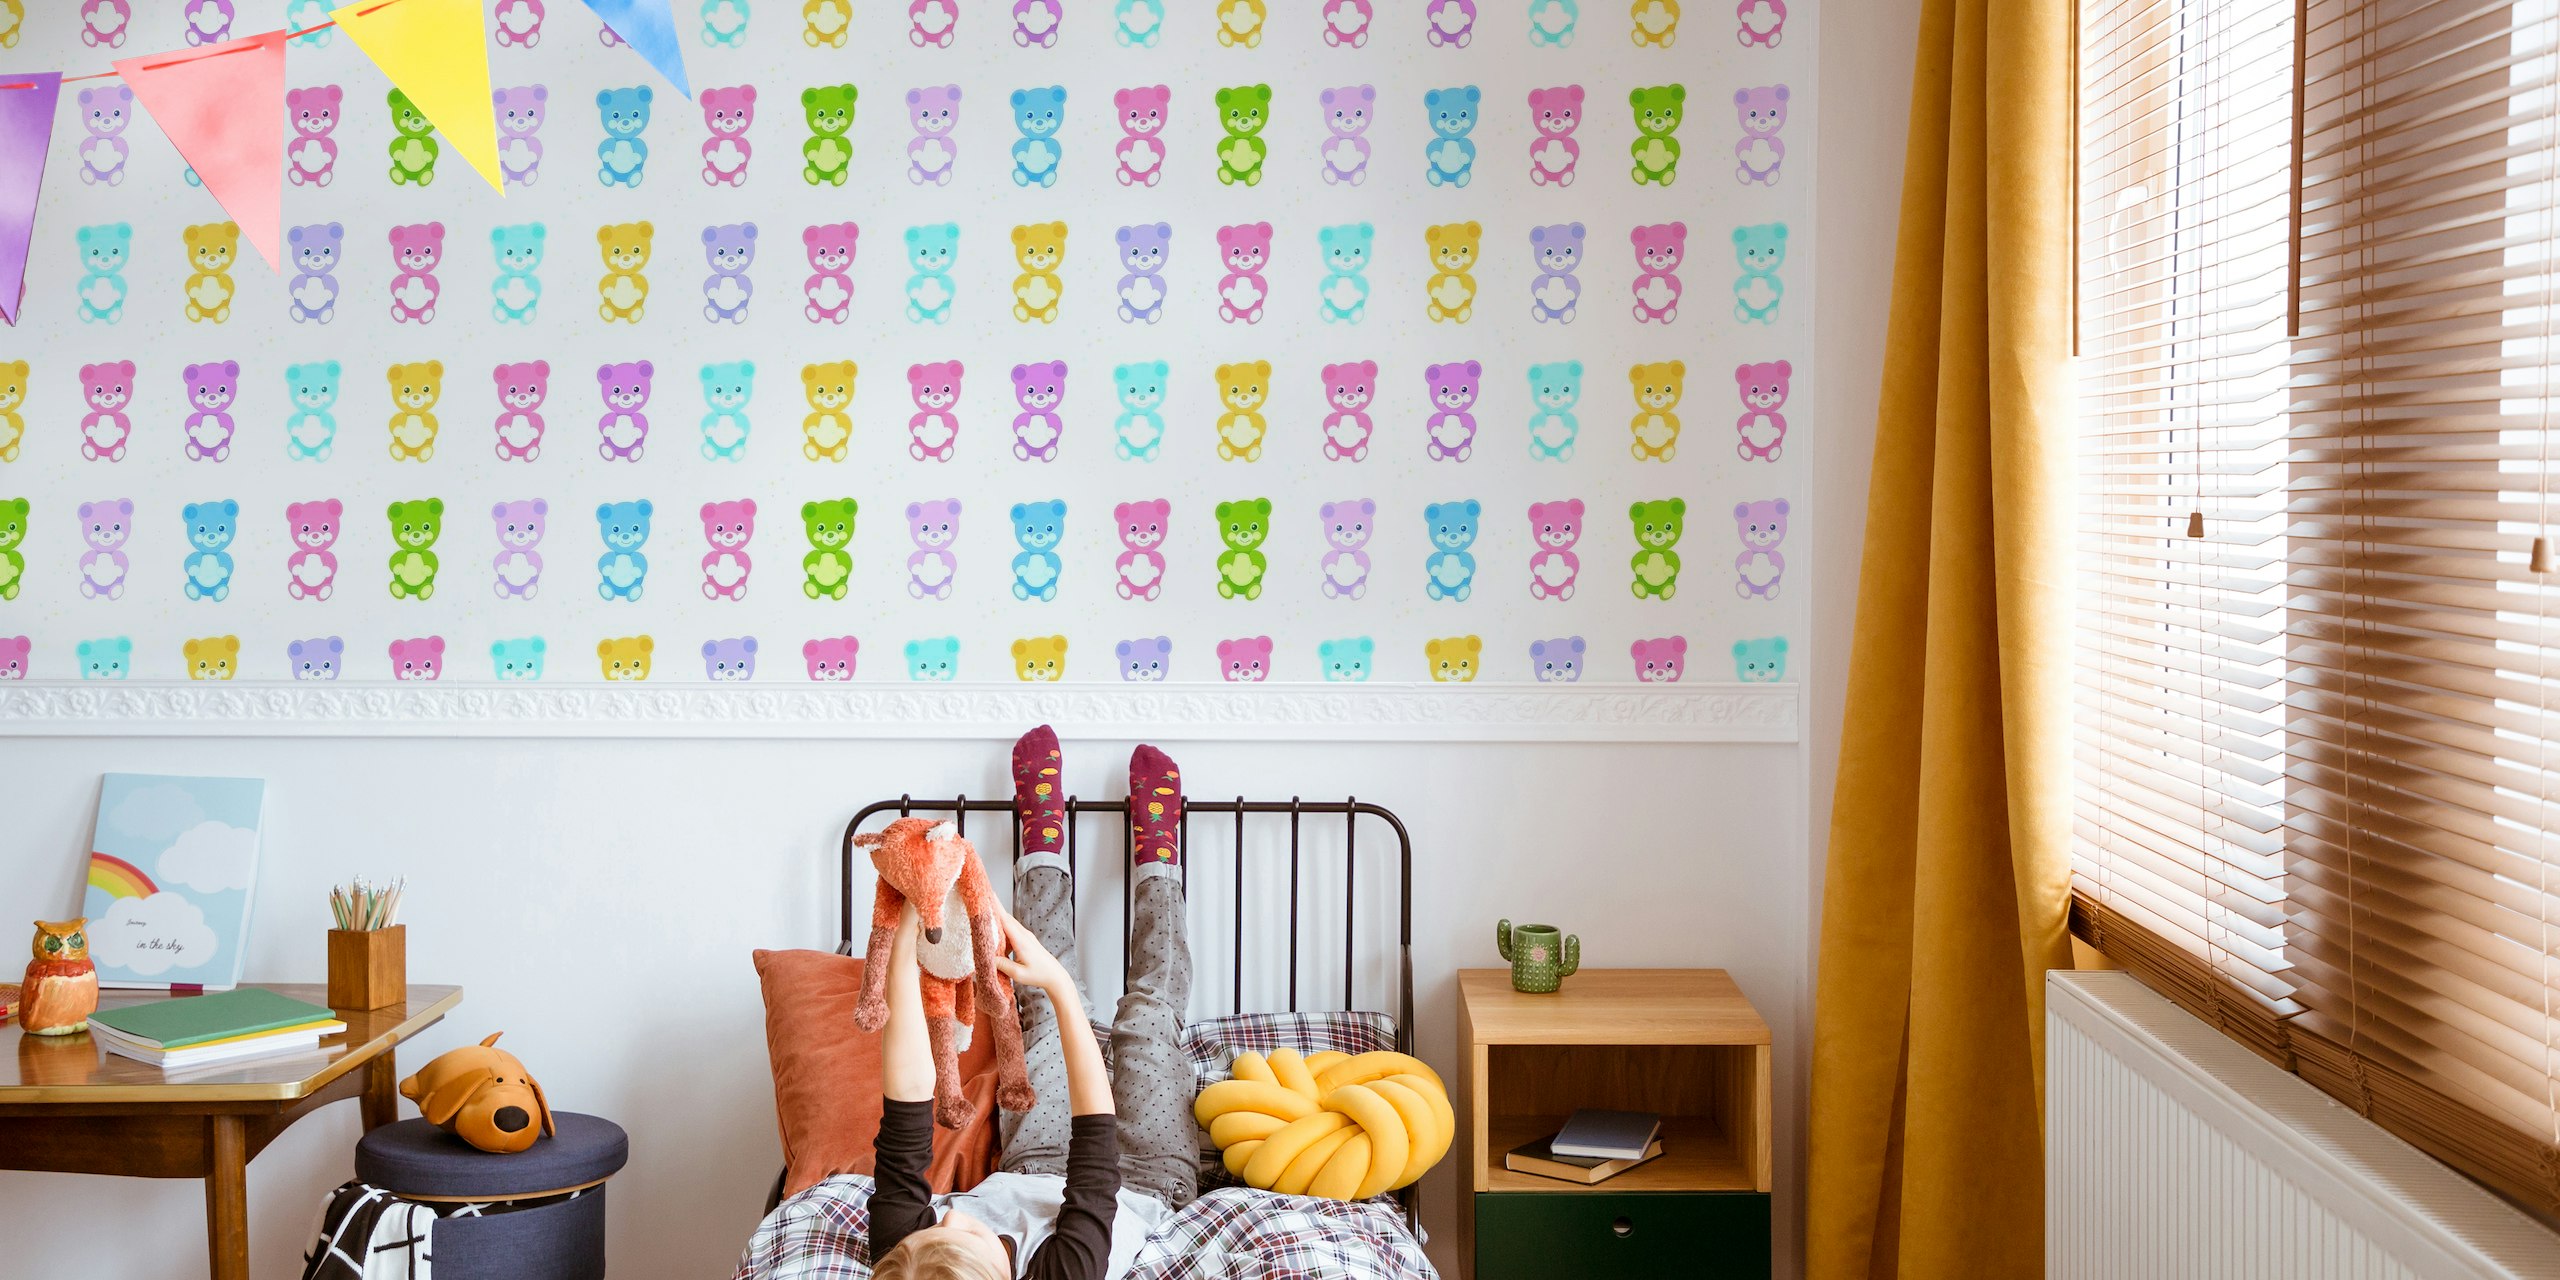 Colorful teddy bears pattern wall mural for children's rooms